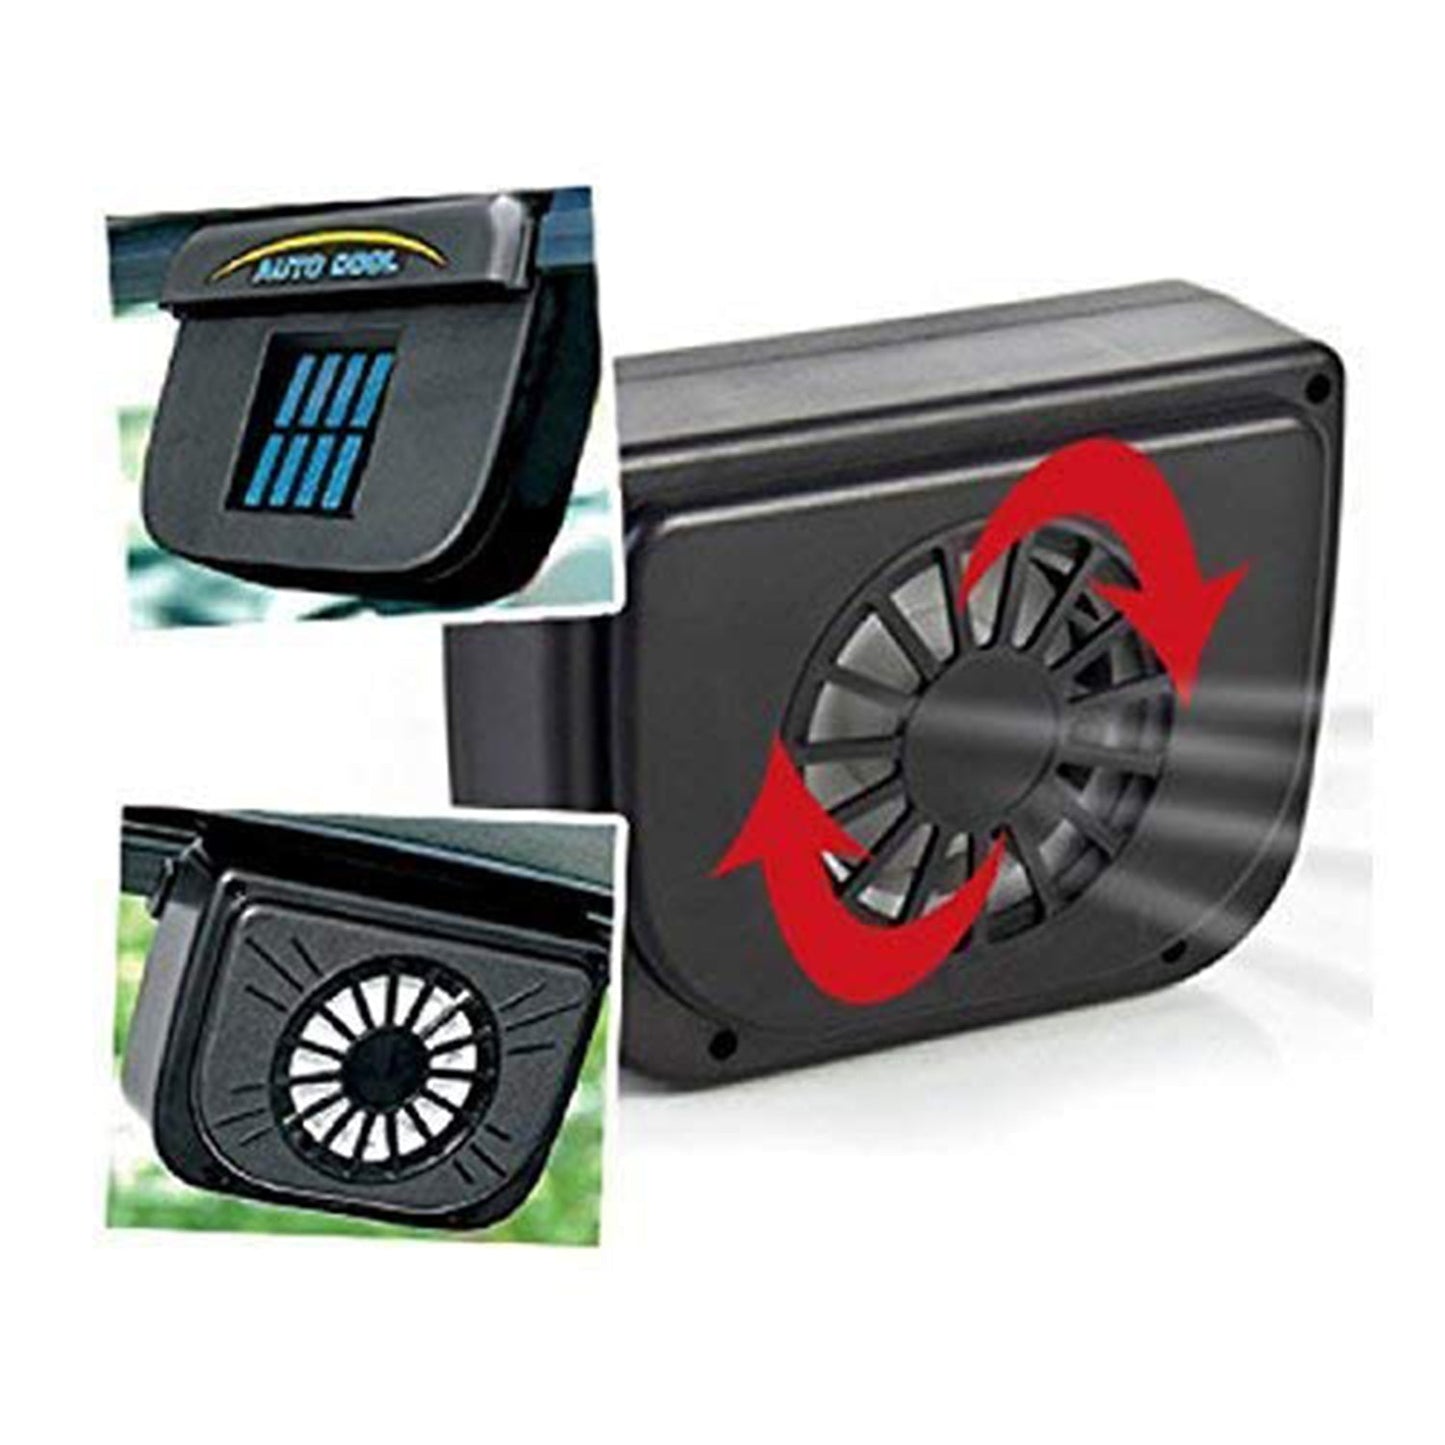 1460 Plastic Auto Cool- Solar Powered Ventilation Fan Keeps Your Parked Car Cool 